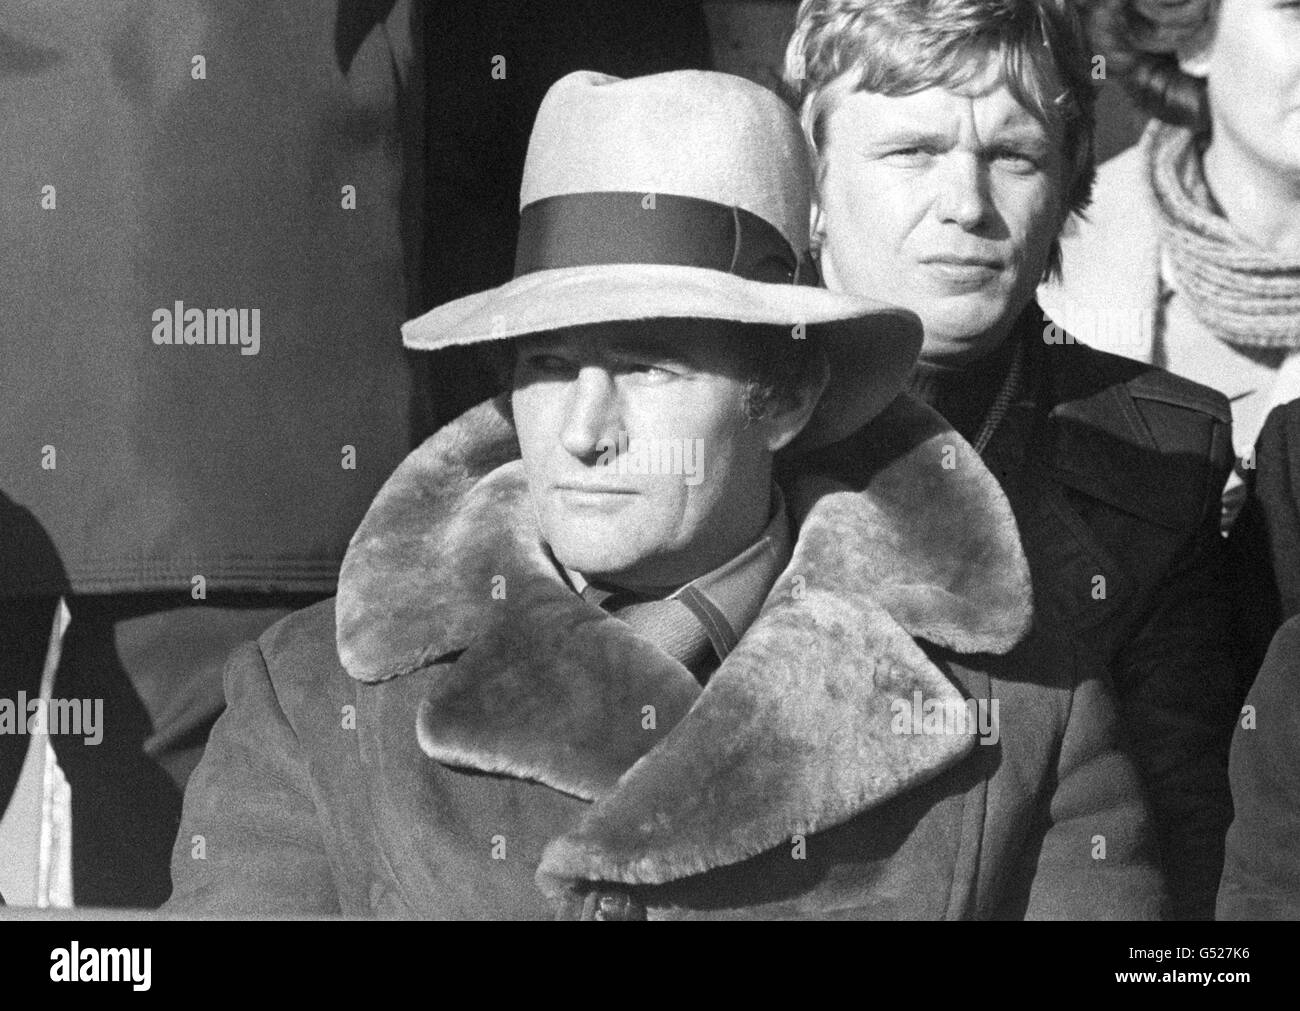 Crystal Palace manager Malcolm Allison, wearing a large brim hat, watches the game at Scarborough, which Palace won 2-1. Stock Photo